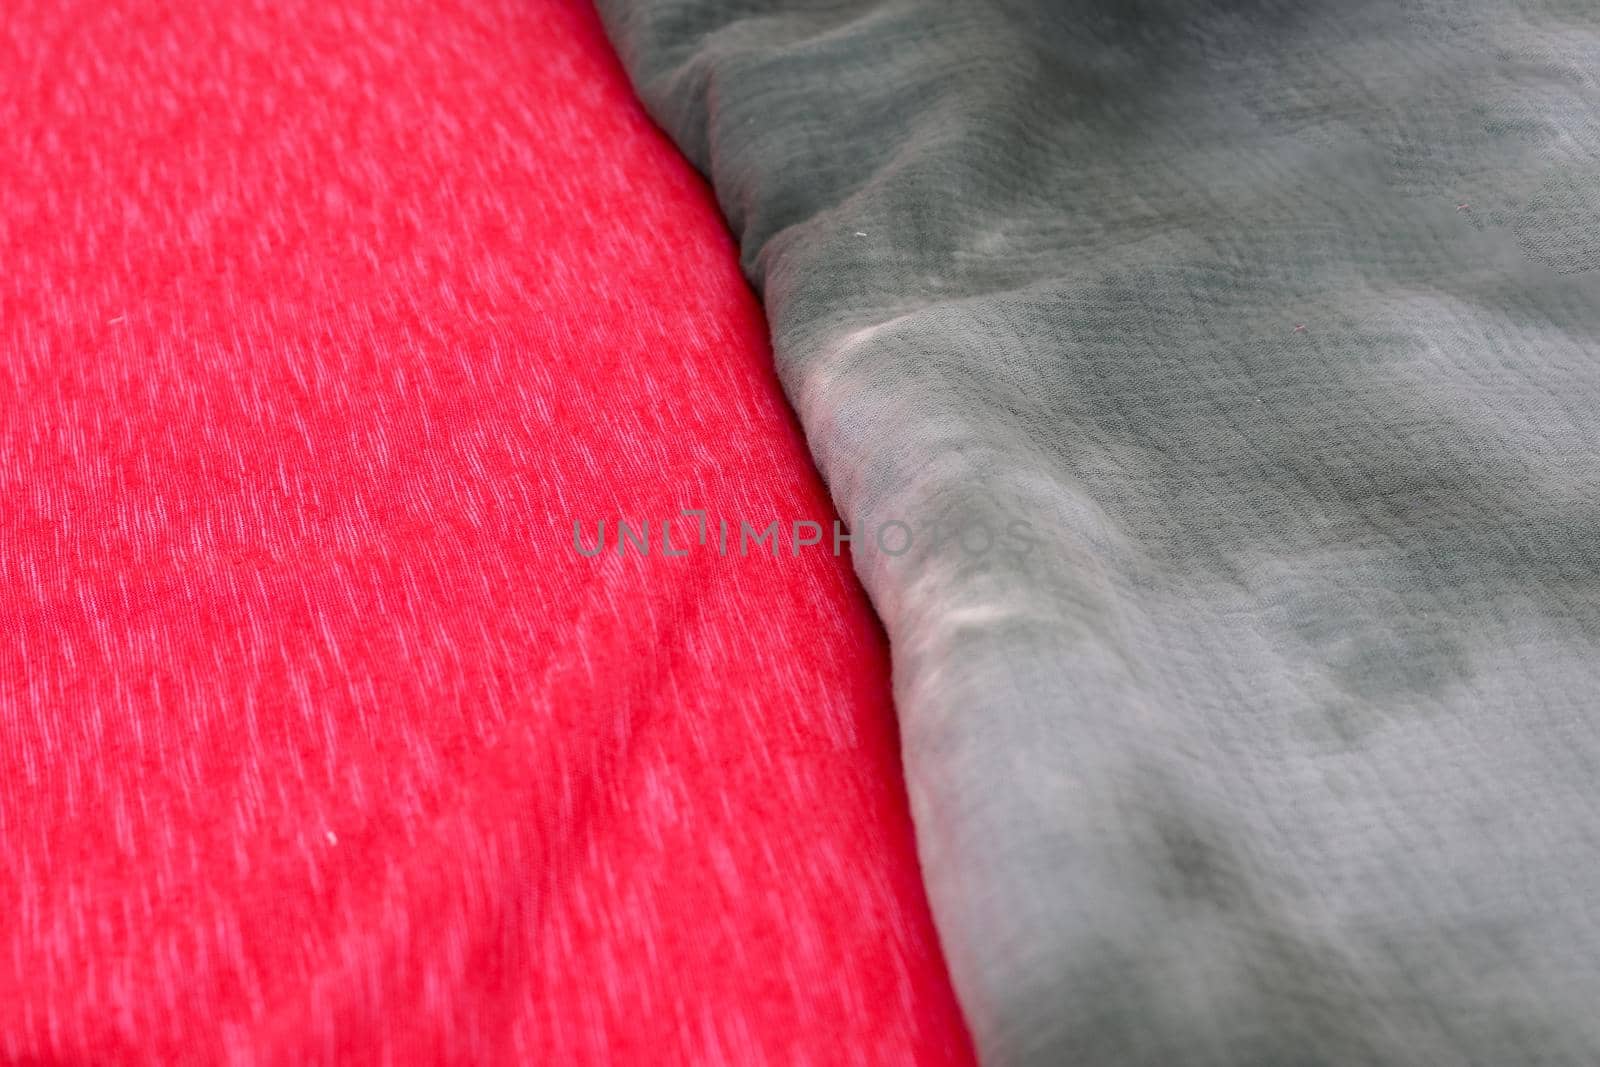 Detailed close up view on samples of cloth and fabrics in different colors found at a fabrics market by MP_foto71